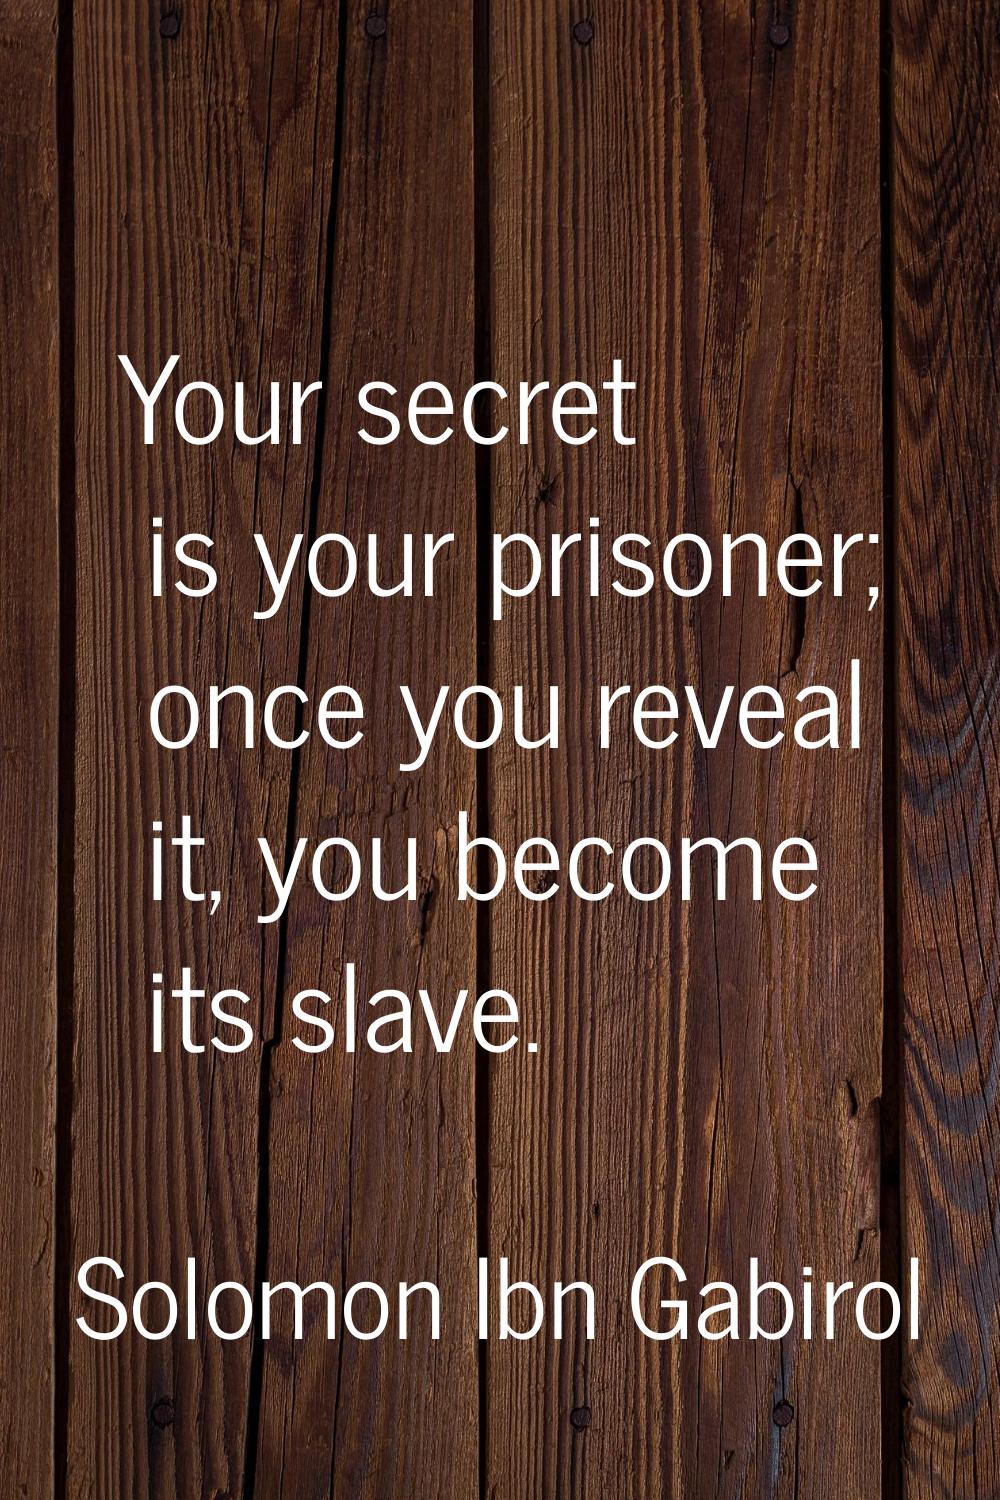 Your secret is your prisoner; once you reveal it, you become its slave.